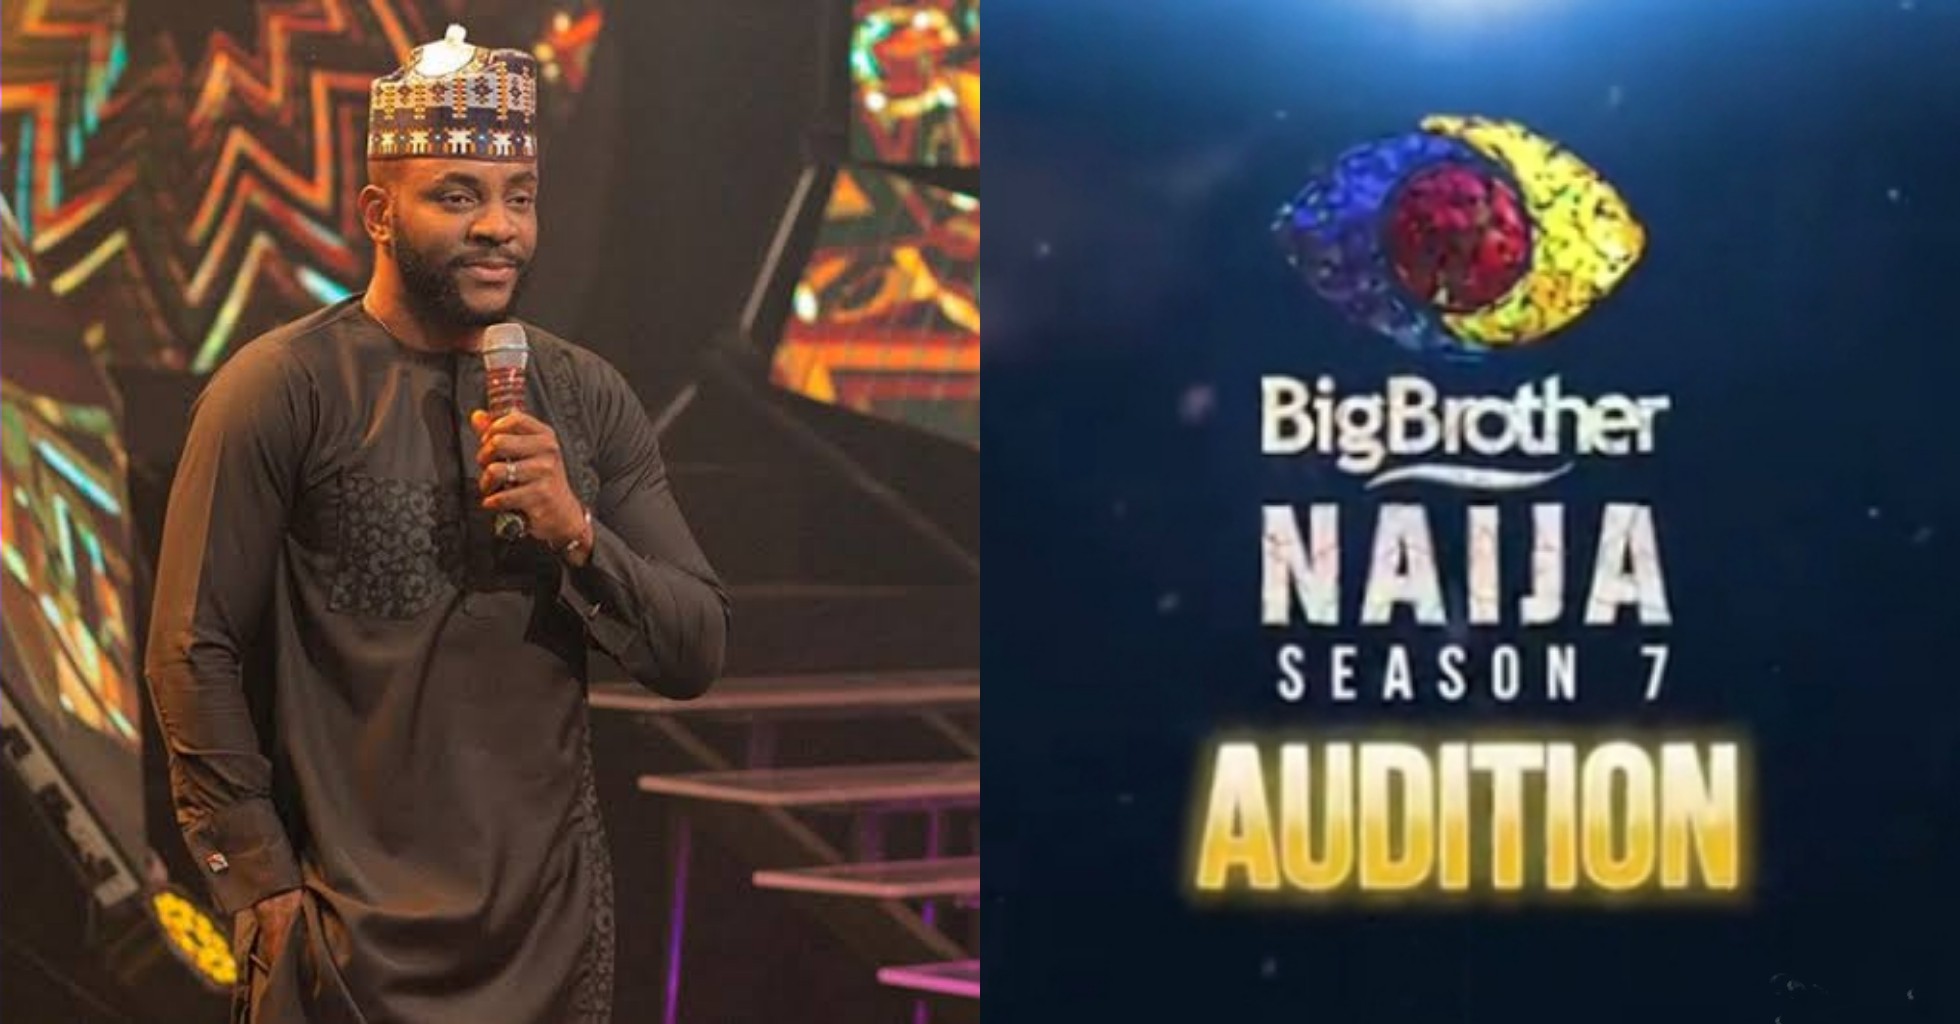 VIDEO: How to participate in Big Brother Naija Season 7 auditions - Organizers